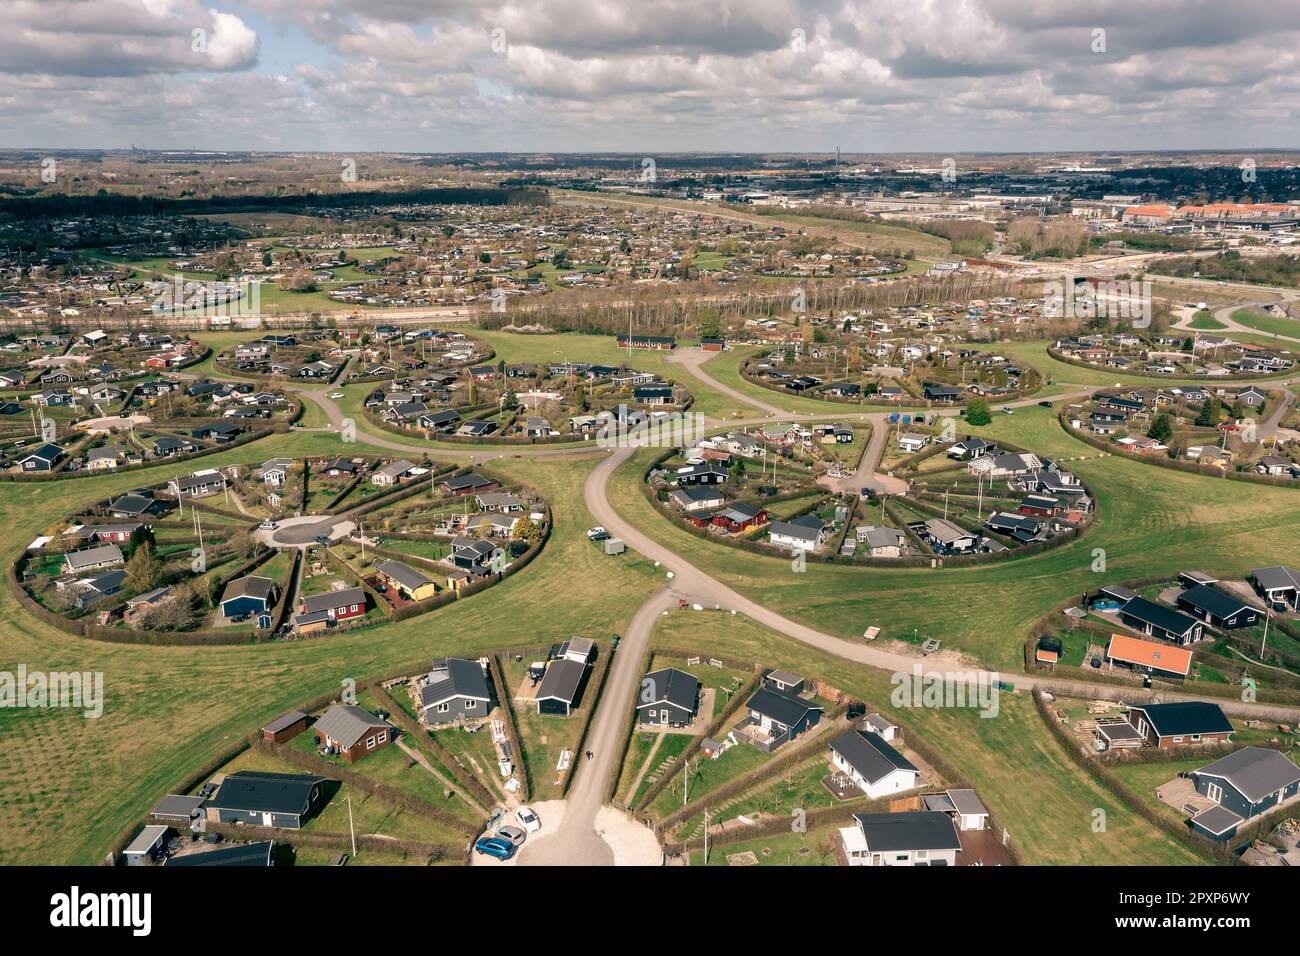 The circular allotment garden complex Brøndby Haveby. It was designed by the Danish landscape architect Erik Mygind. Stock Photo